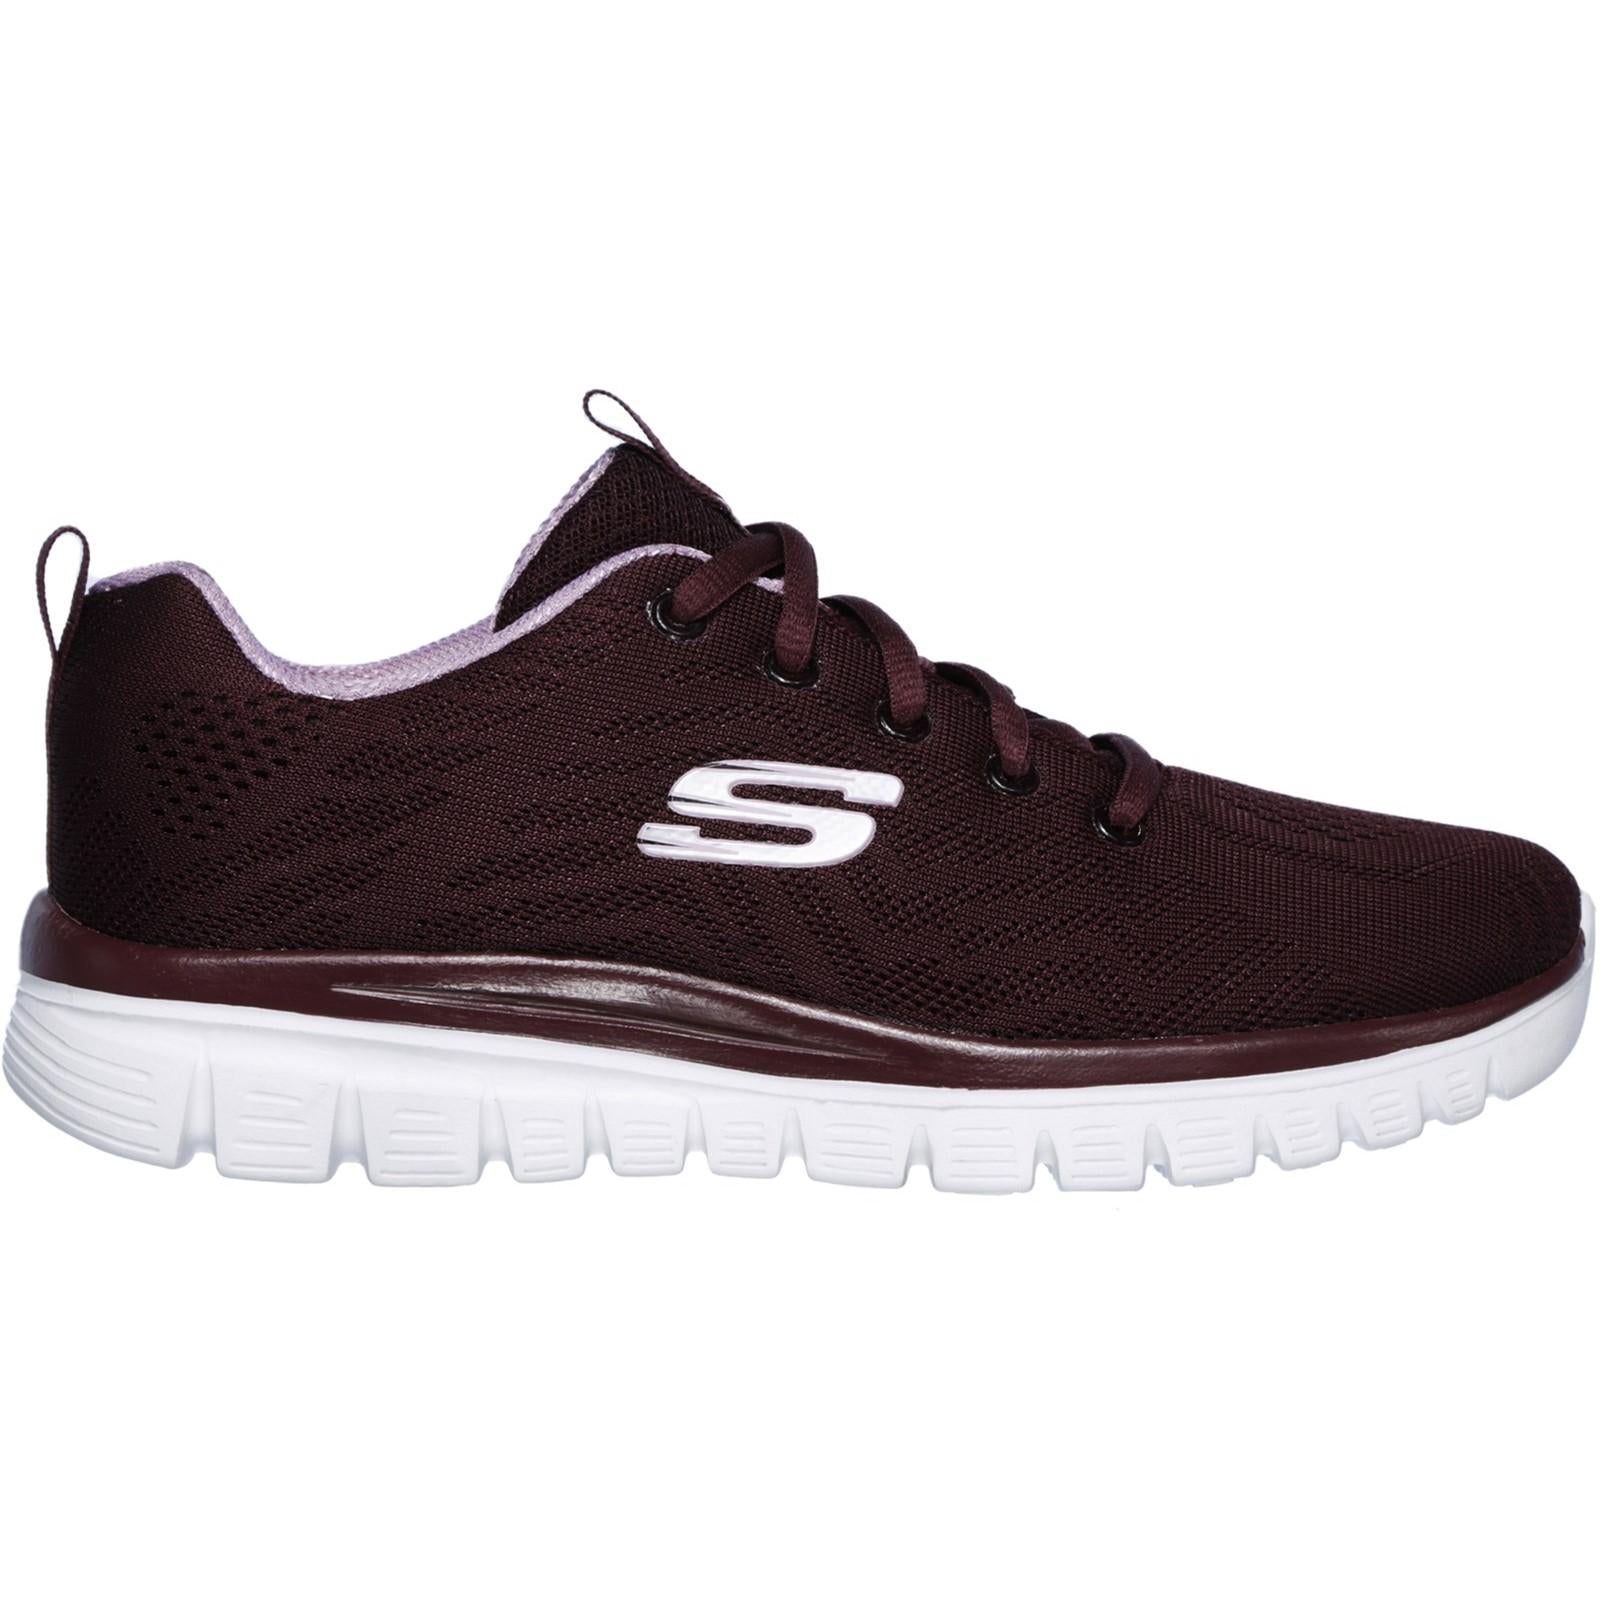 Skechers Graceful Get Connected Sports Shoe